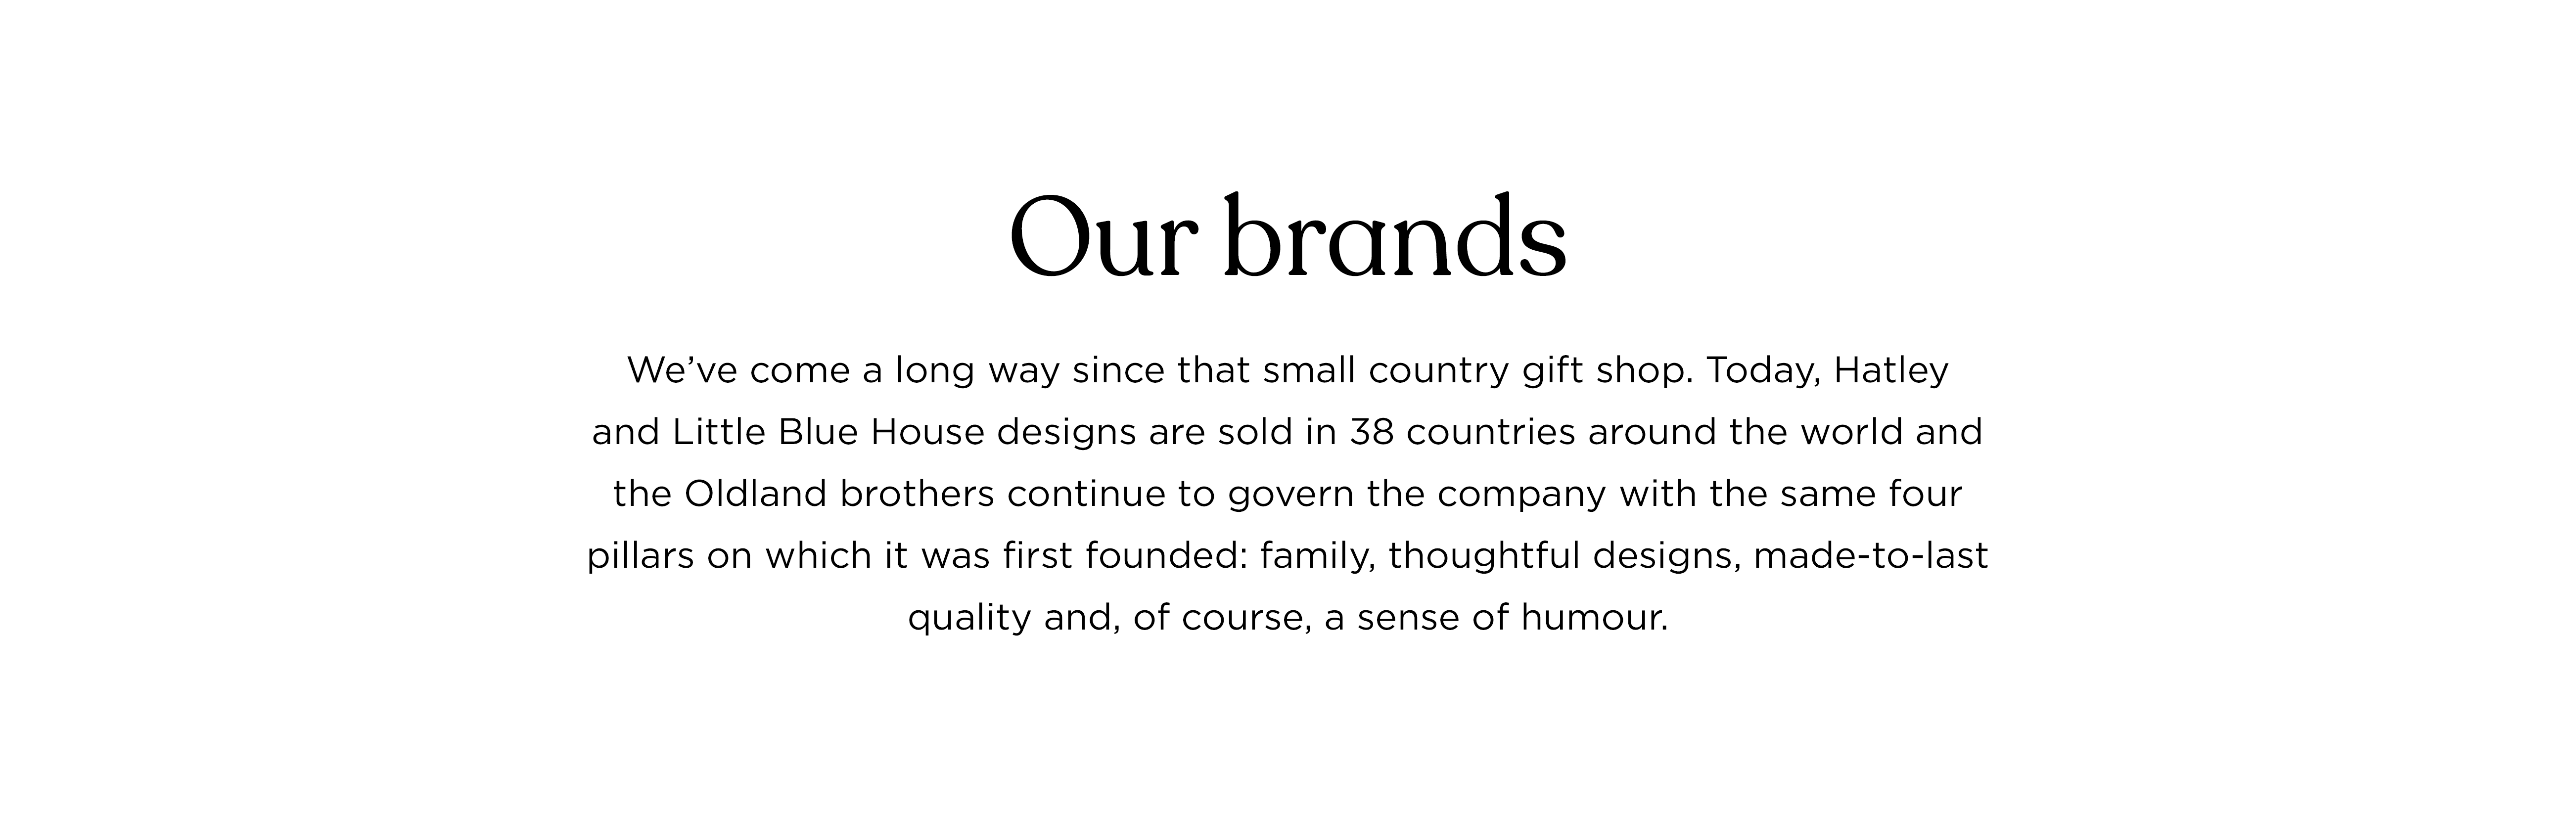 Our brands: sold in 38 countries around the world